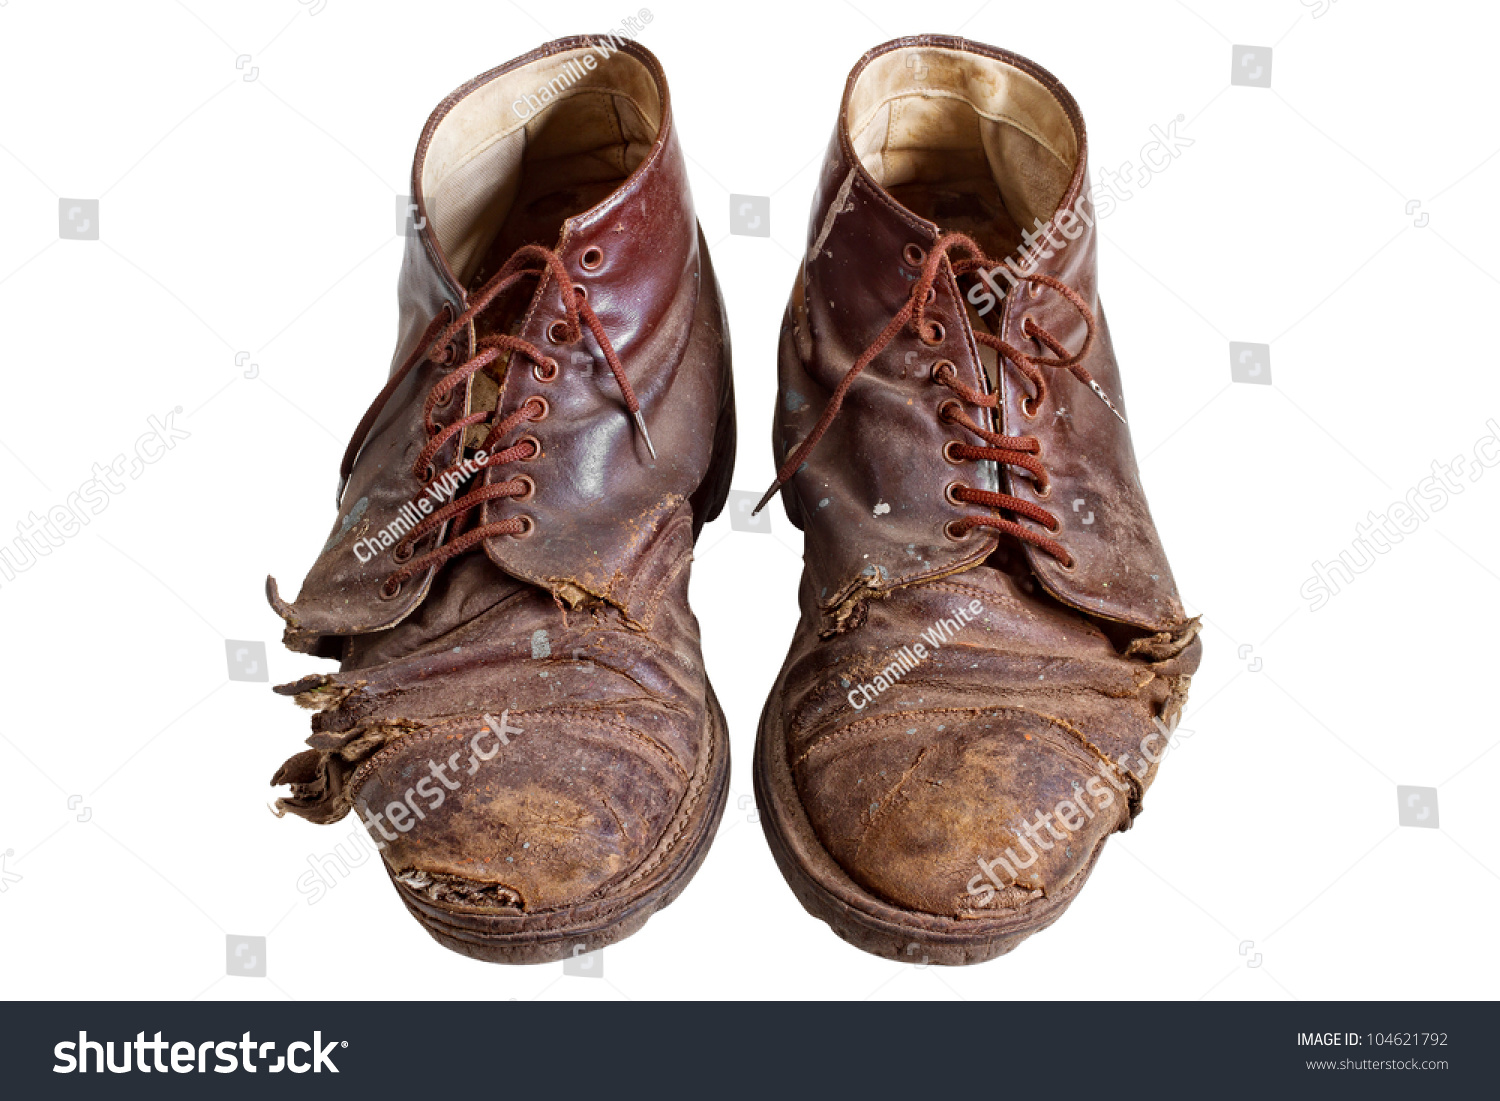 Old Worn Out Boots, Isolated On White Stock Photo 104621792 : Shutterstock